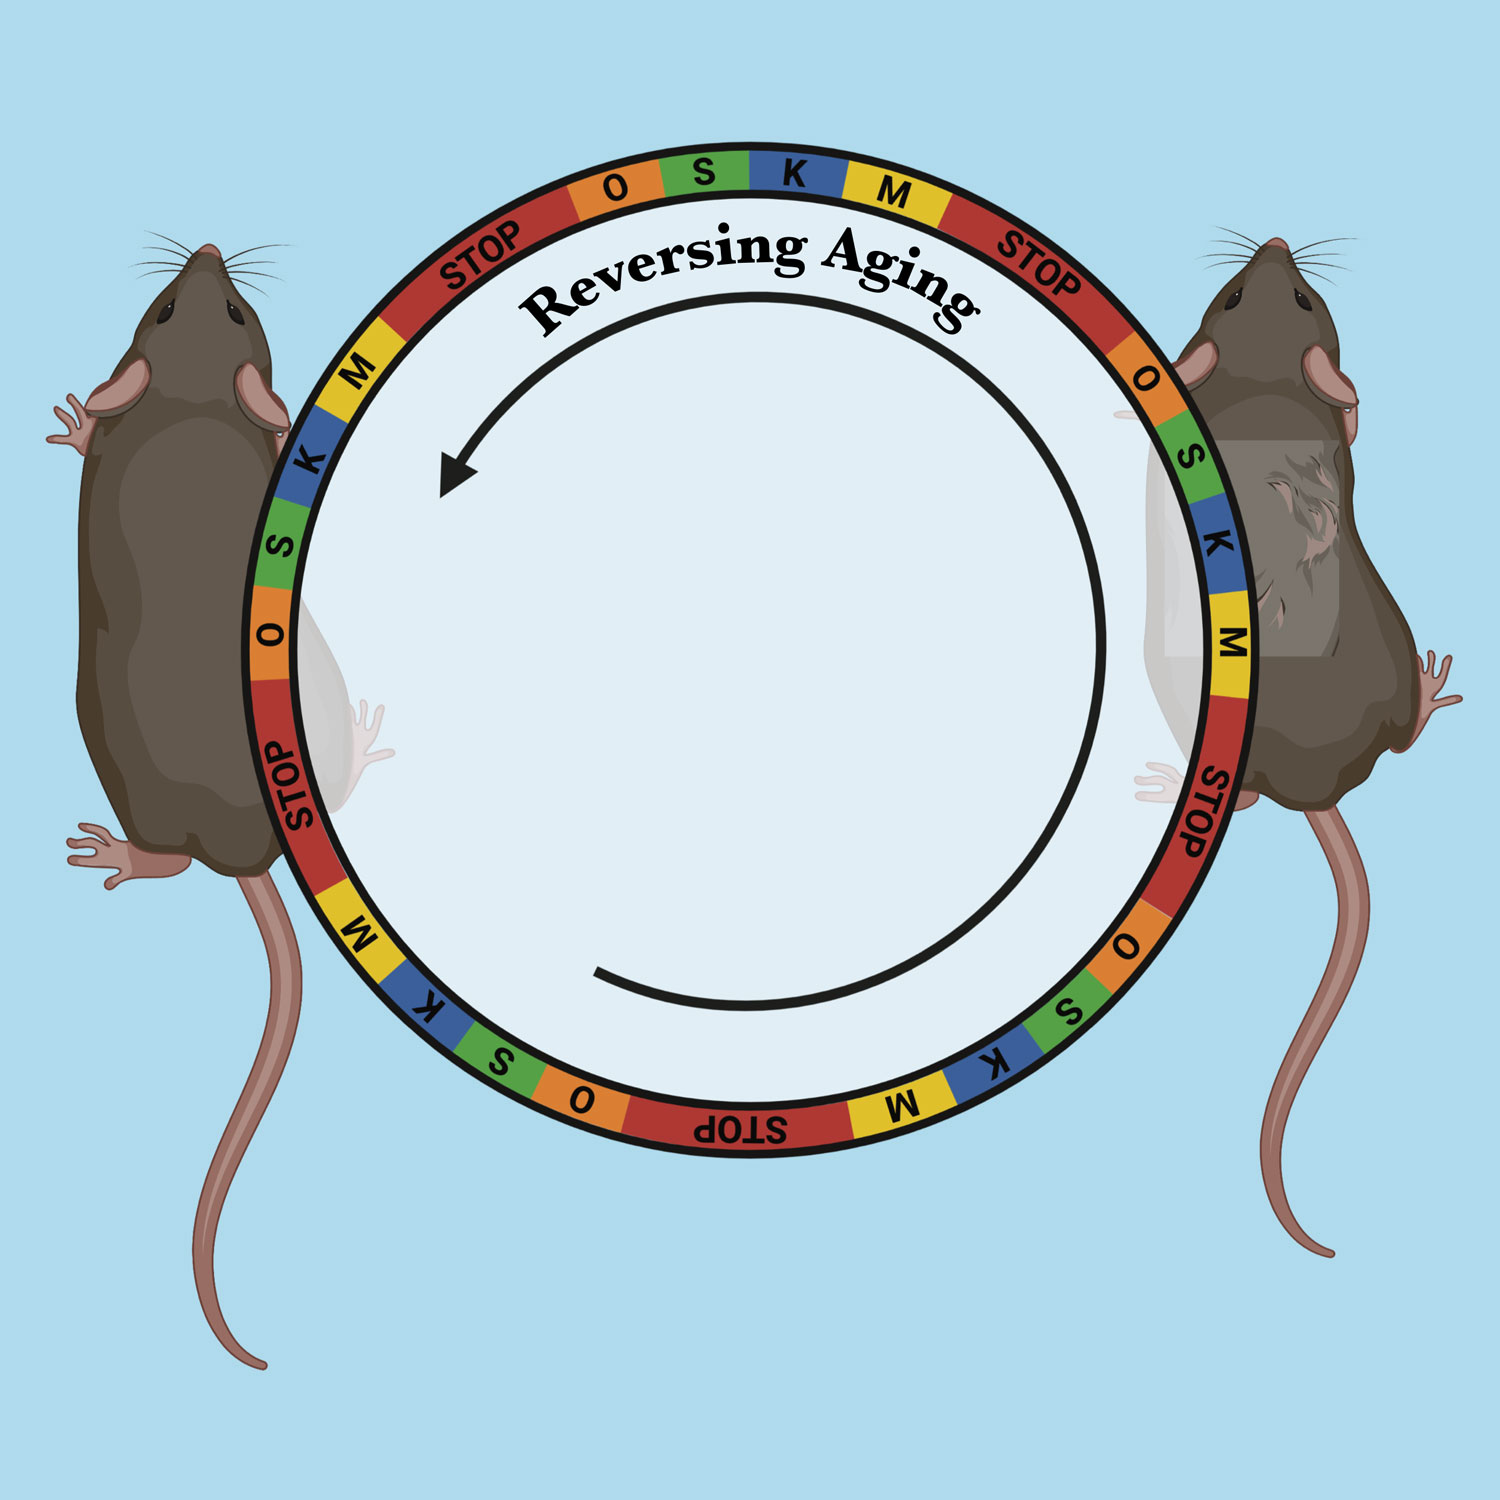 Cellular rejuvenation therapy safely reverses signs of aging in mice. Credit: Salk Institute